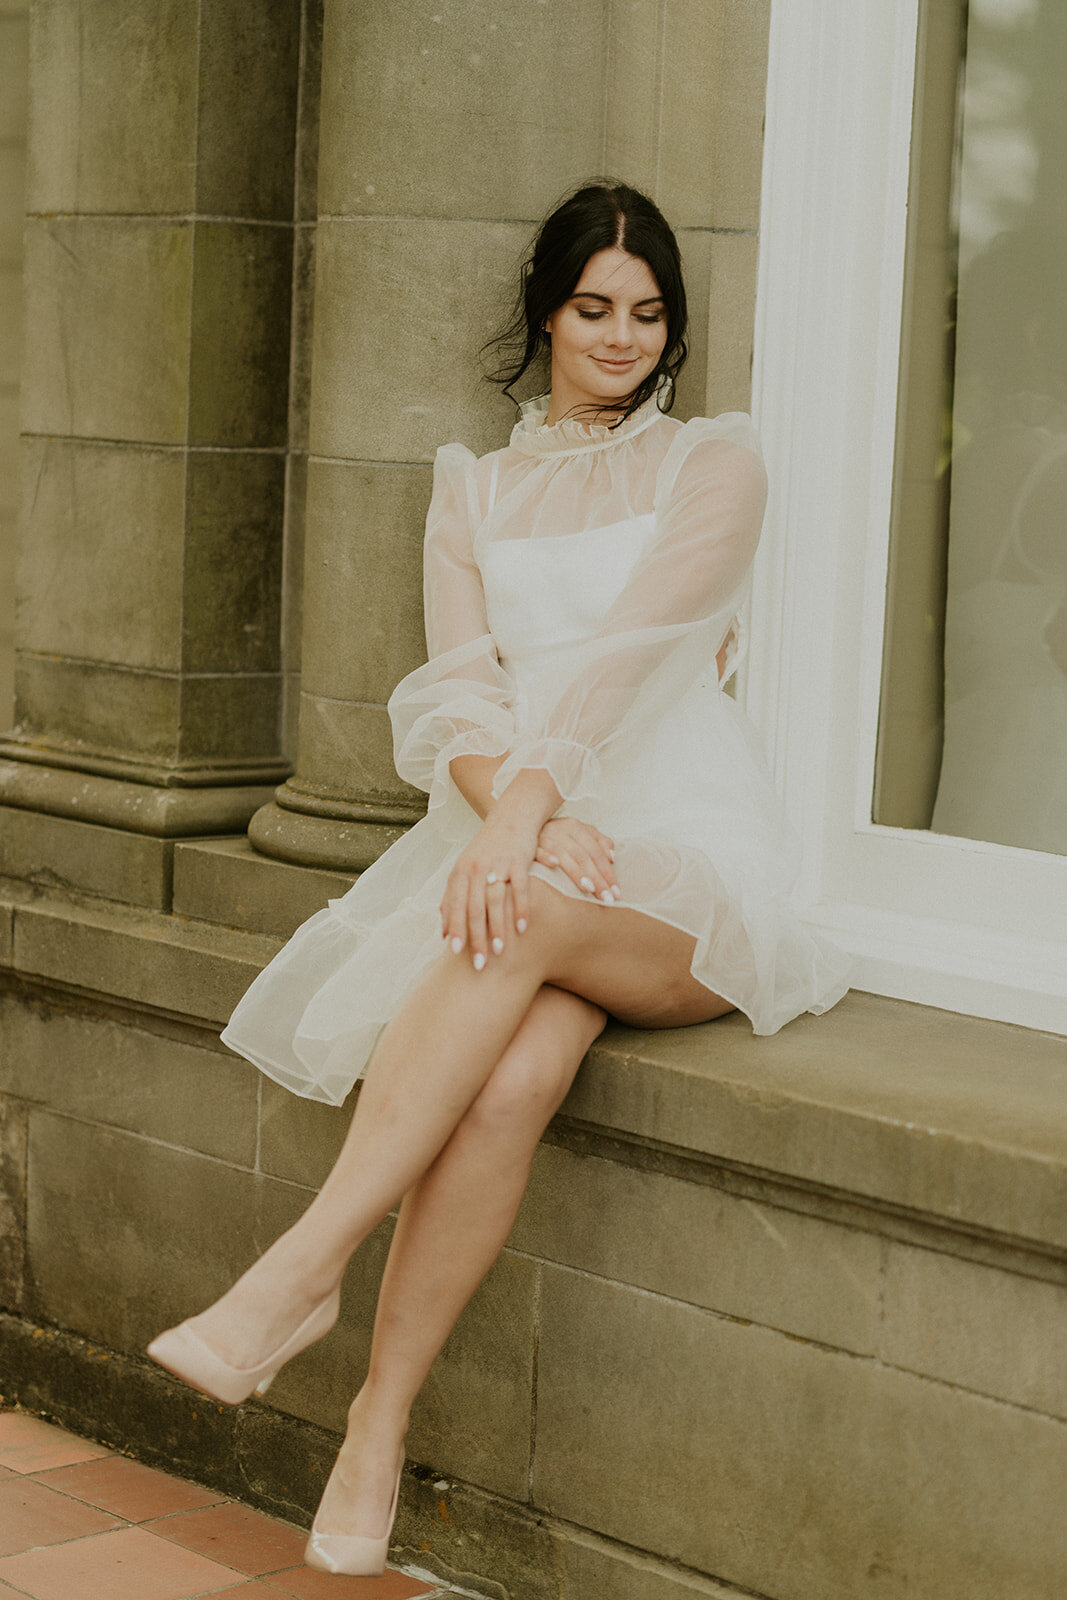 the-girl-sits-on-the-windowsill-an-a-white-dress-and-smiling